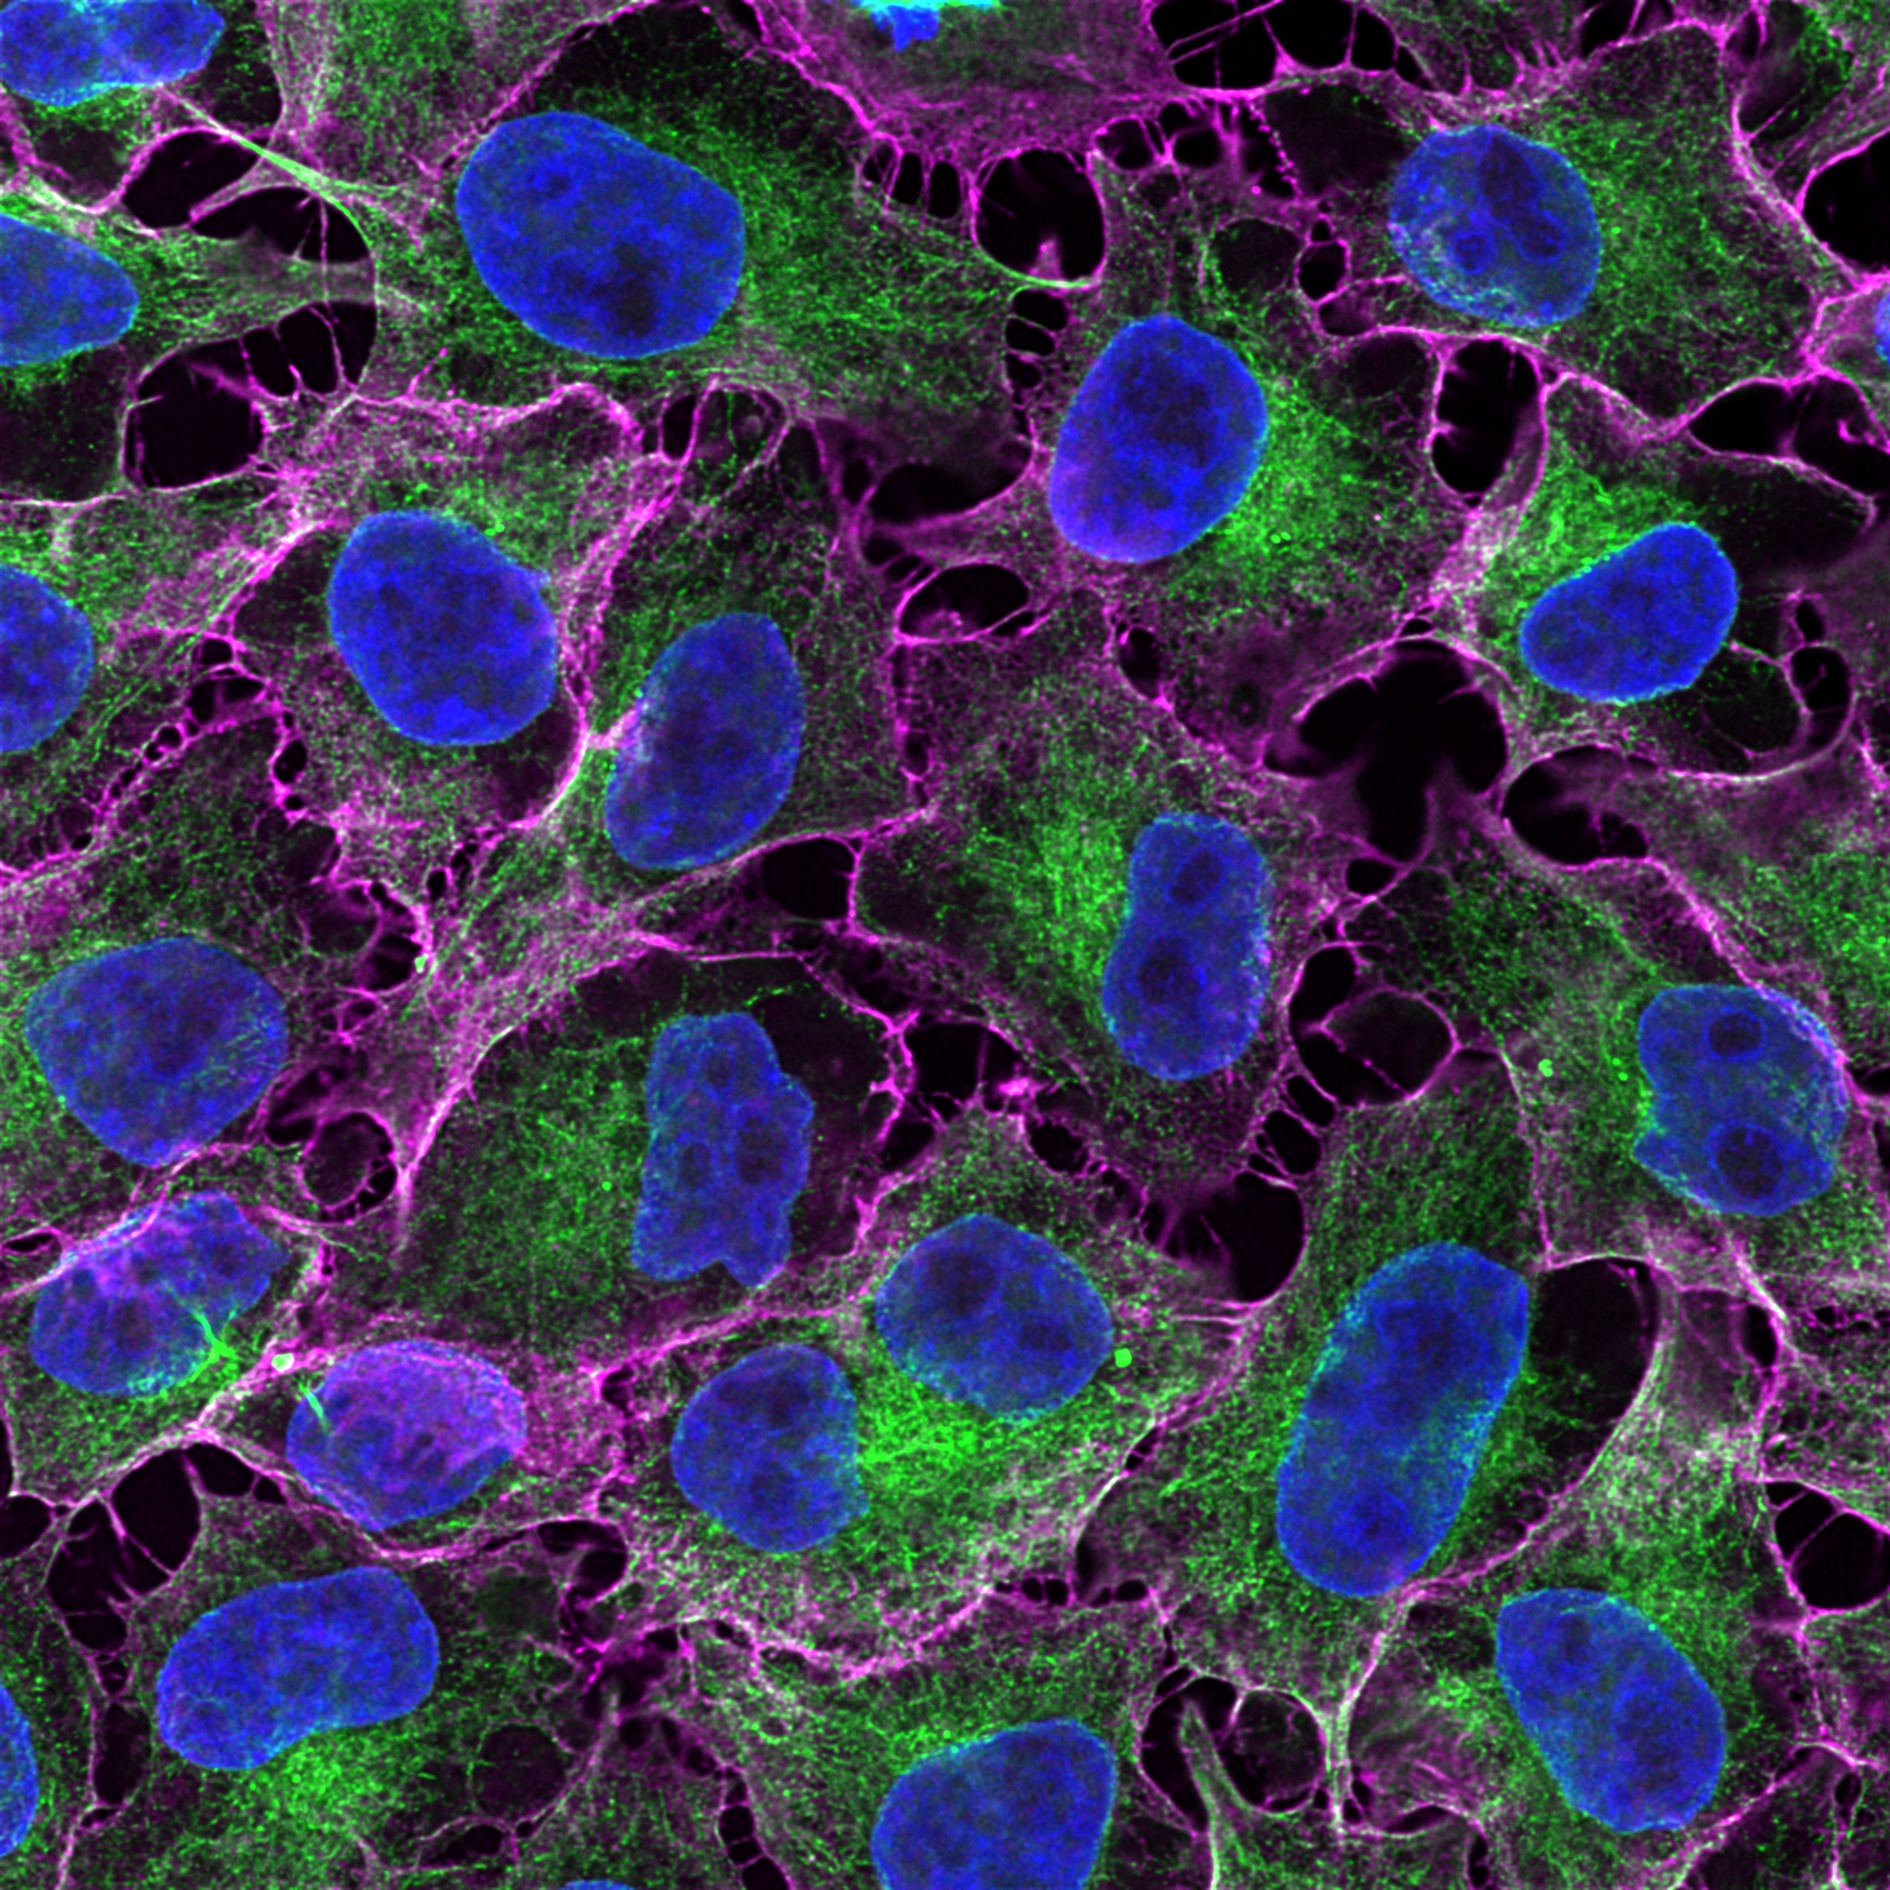 Immunofluorescence analysis of HeLa cells co-stained with mouse IgG2b anti-tubulin beta antibody and mouse IgG1 CD147 antibody followed by Nano-Secondary® alpaca anti-mouse IgG2b, recombinant VHH, CoraLite® Plus 488 (smsG2bCL488-1, green) and Nano-Secondary® alpaca anti-mouse IgG1, recombinant VHH, CoraLite® Plus 647 (smsG1CL647-1, magenta). Nuclei were stained with DAPI (blue). Images were recorded at the Core Facility Bioimaging at the Biomedical Center, LMU Munich.